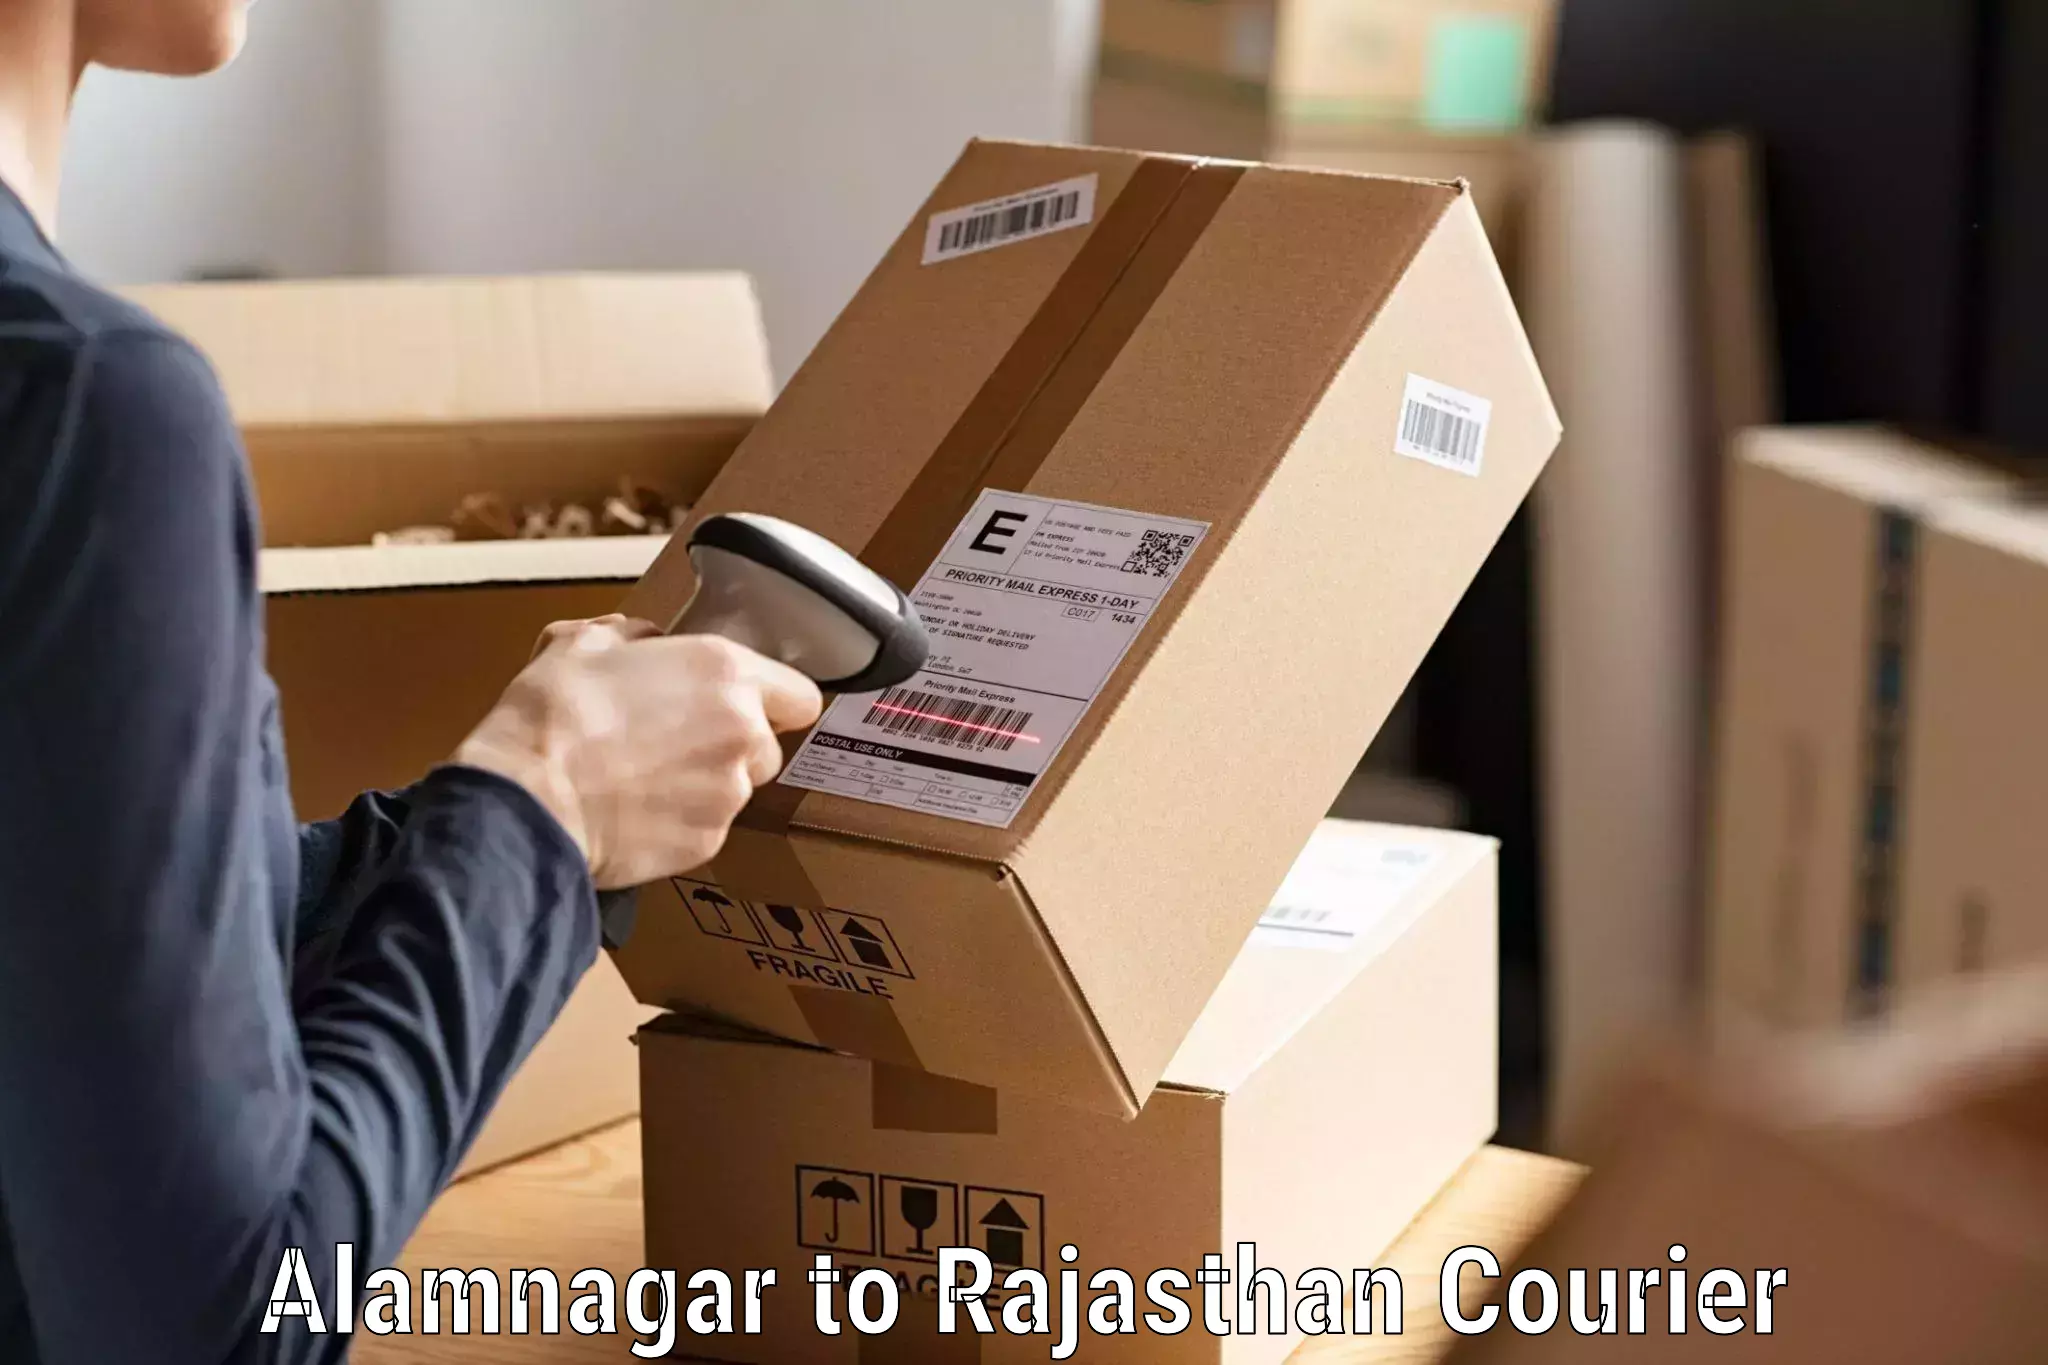 Professional courier services in Alamnagar to Didwana